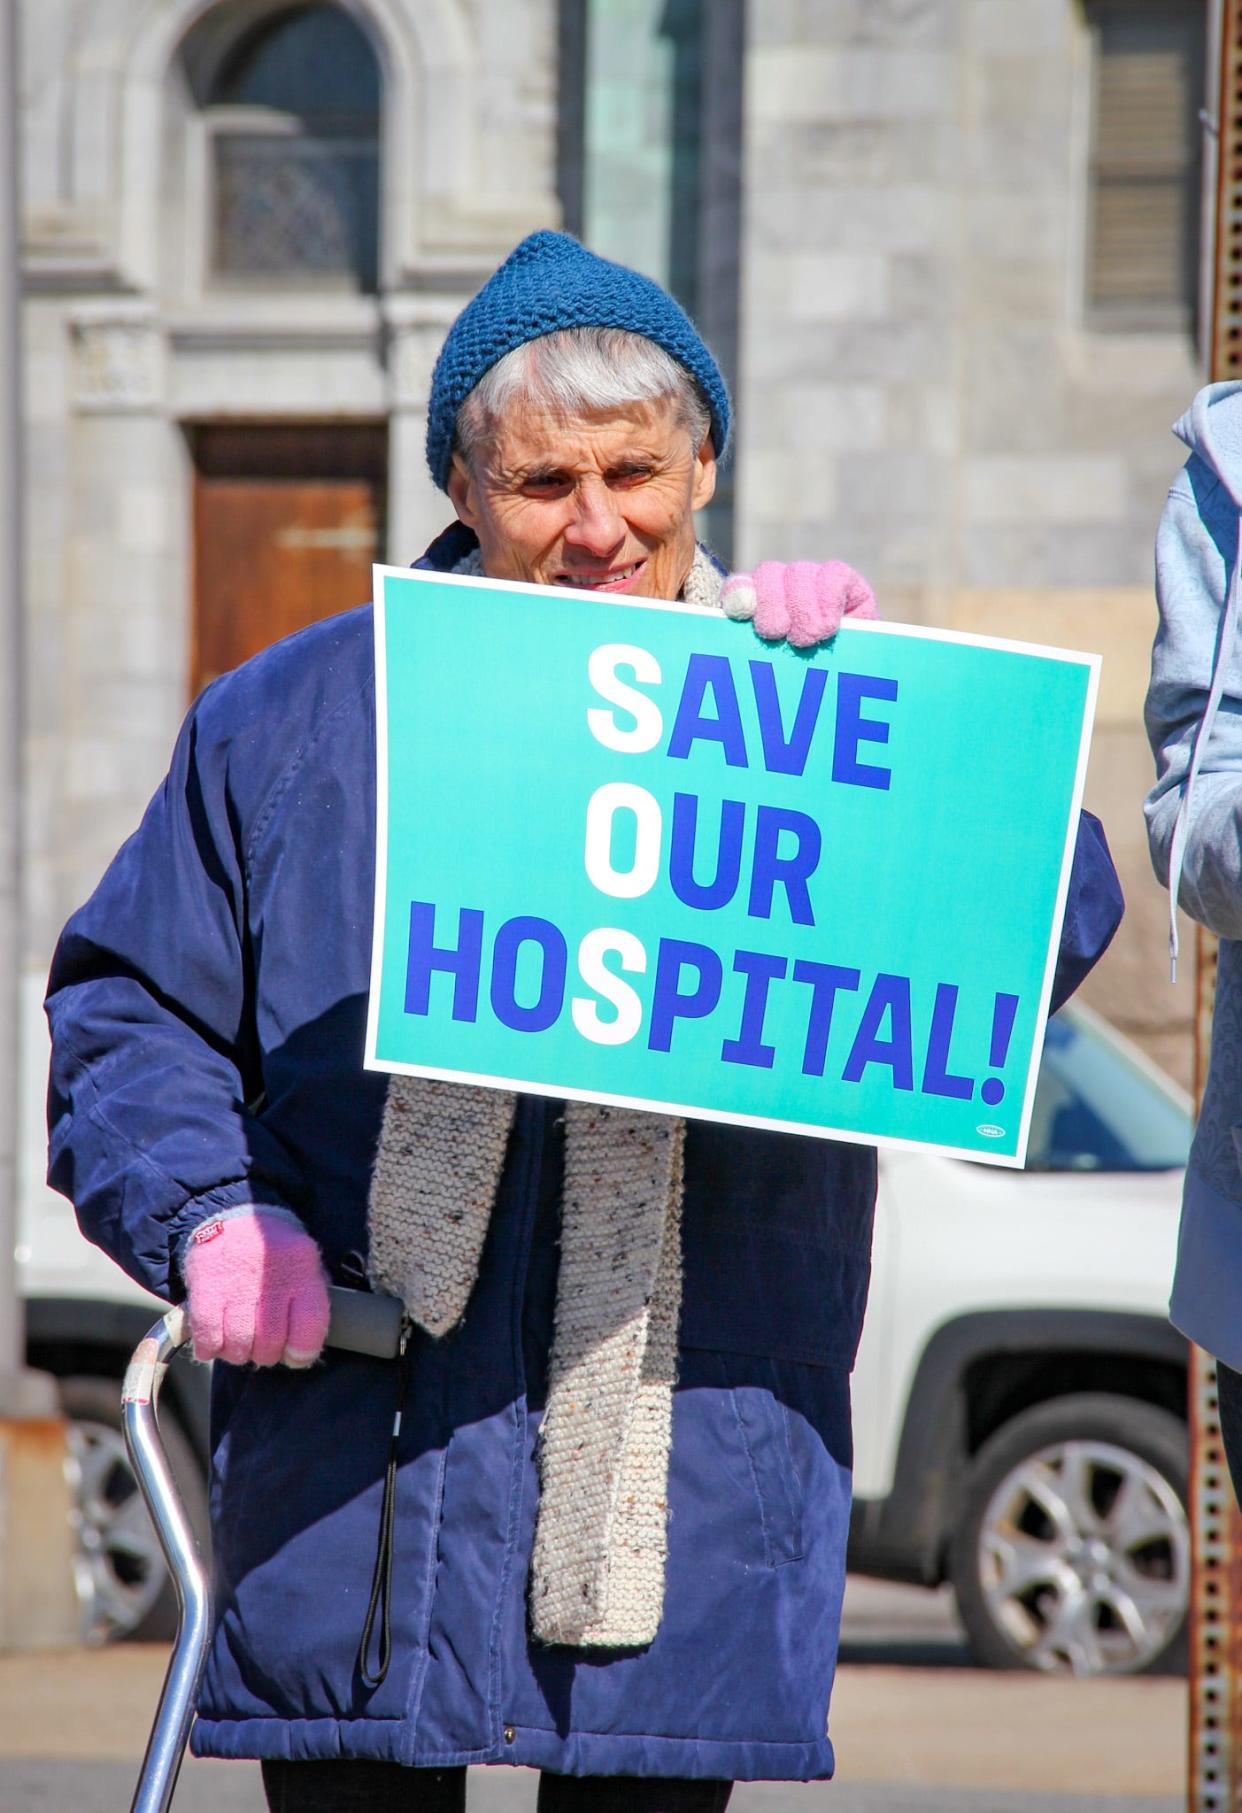 Patricia Silvia of Fall River holds a sign in support of St. Anne's Hospital in Fall River at a rally pushing for secure ownership of Steward Health Care facilities on April 25.